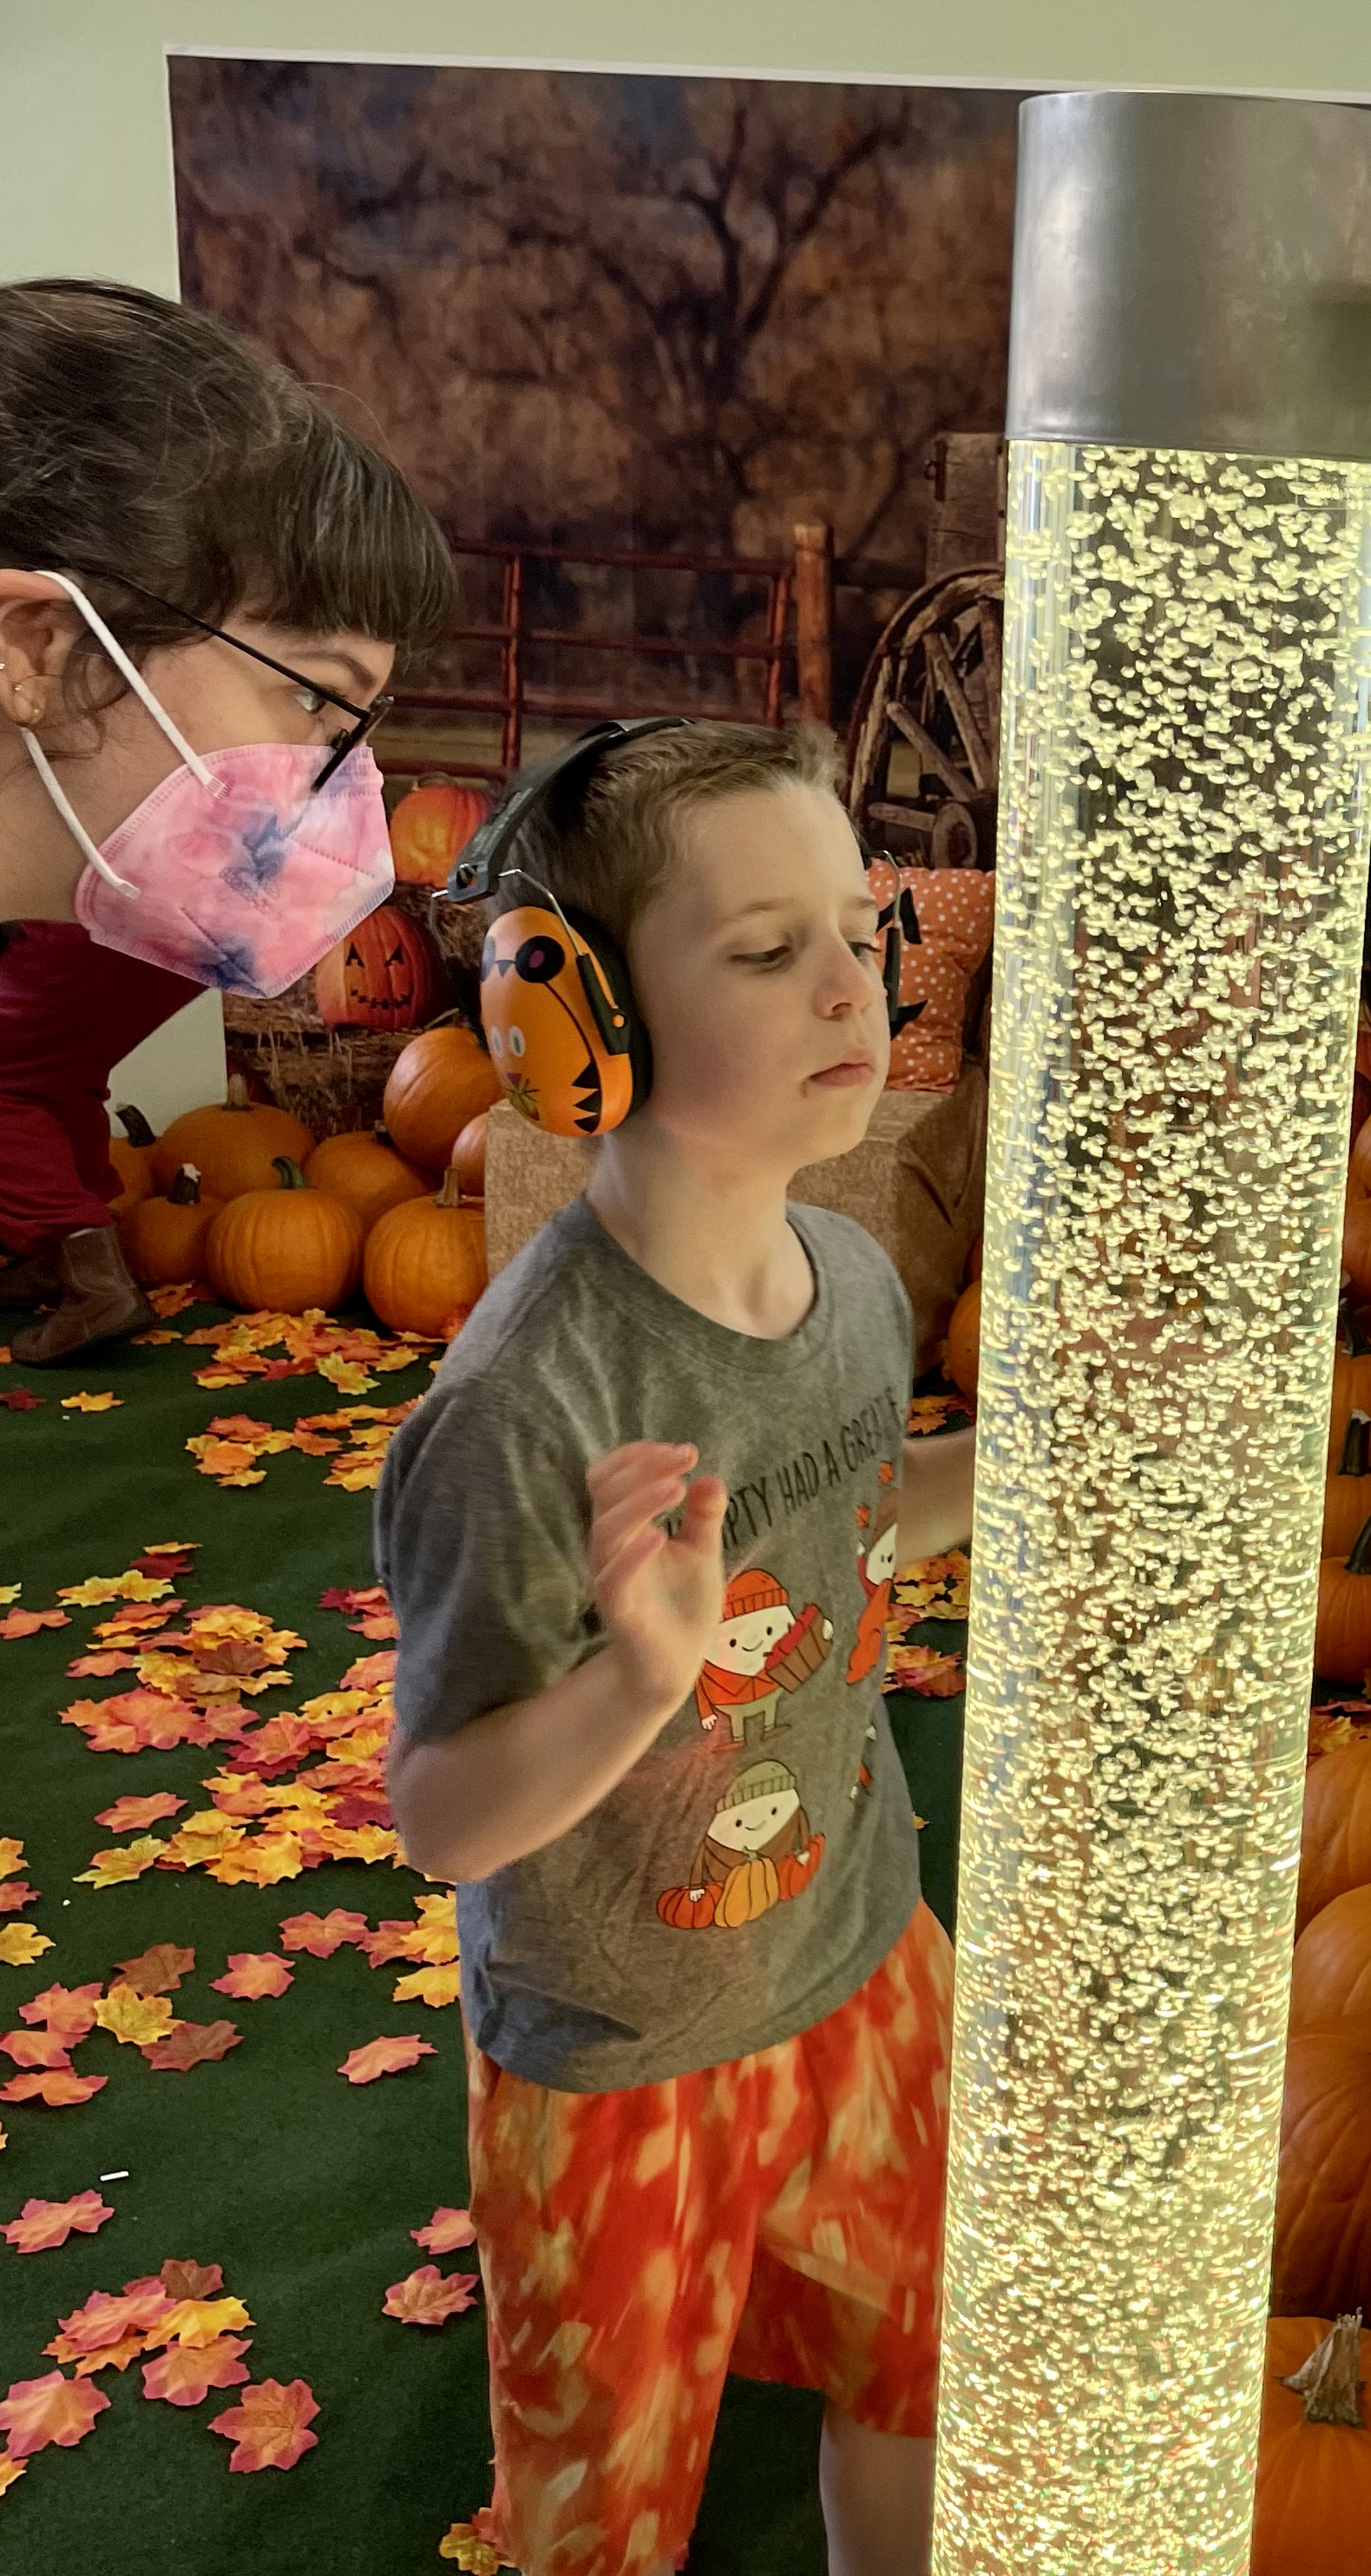 Young boy with noise reducing headphones looking at a bubble tube with an adult